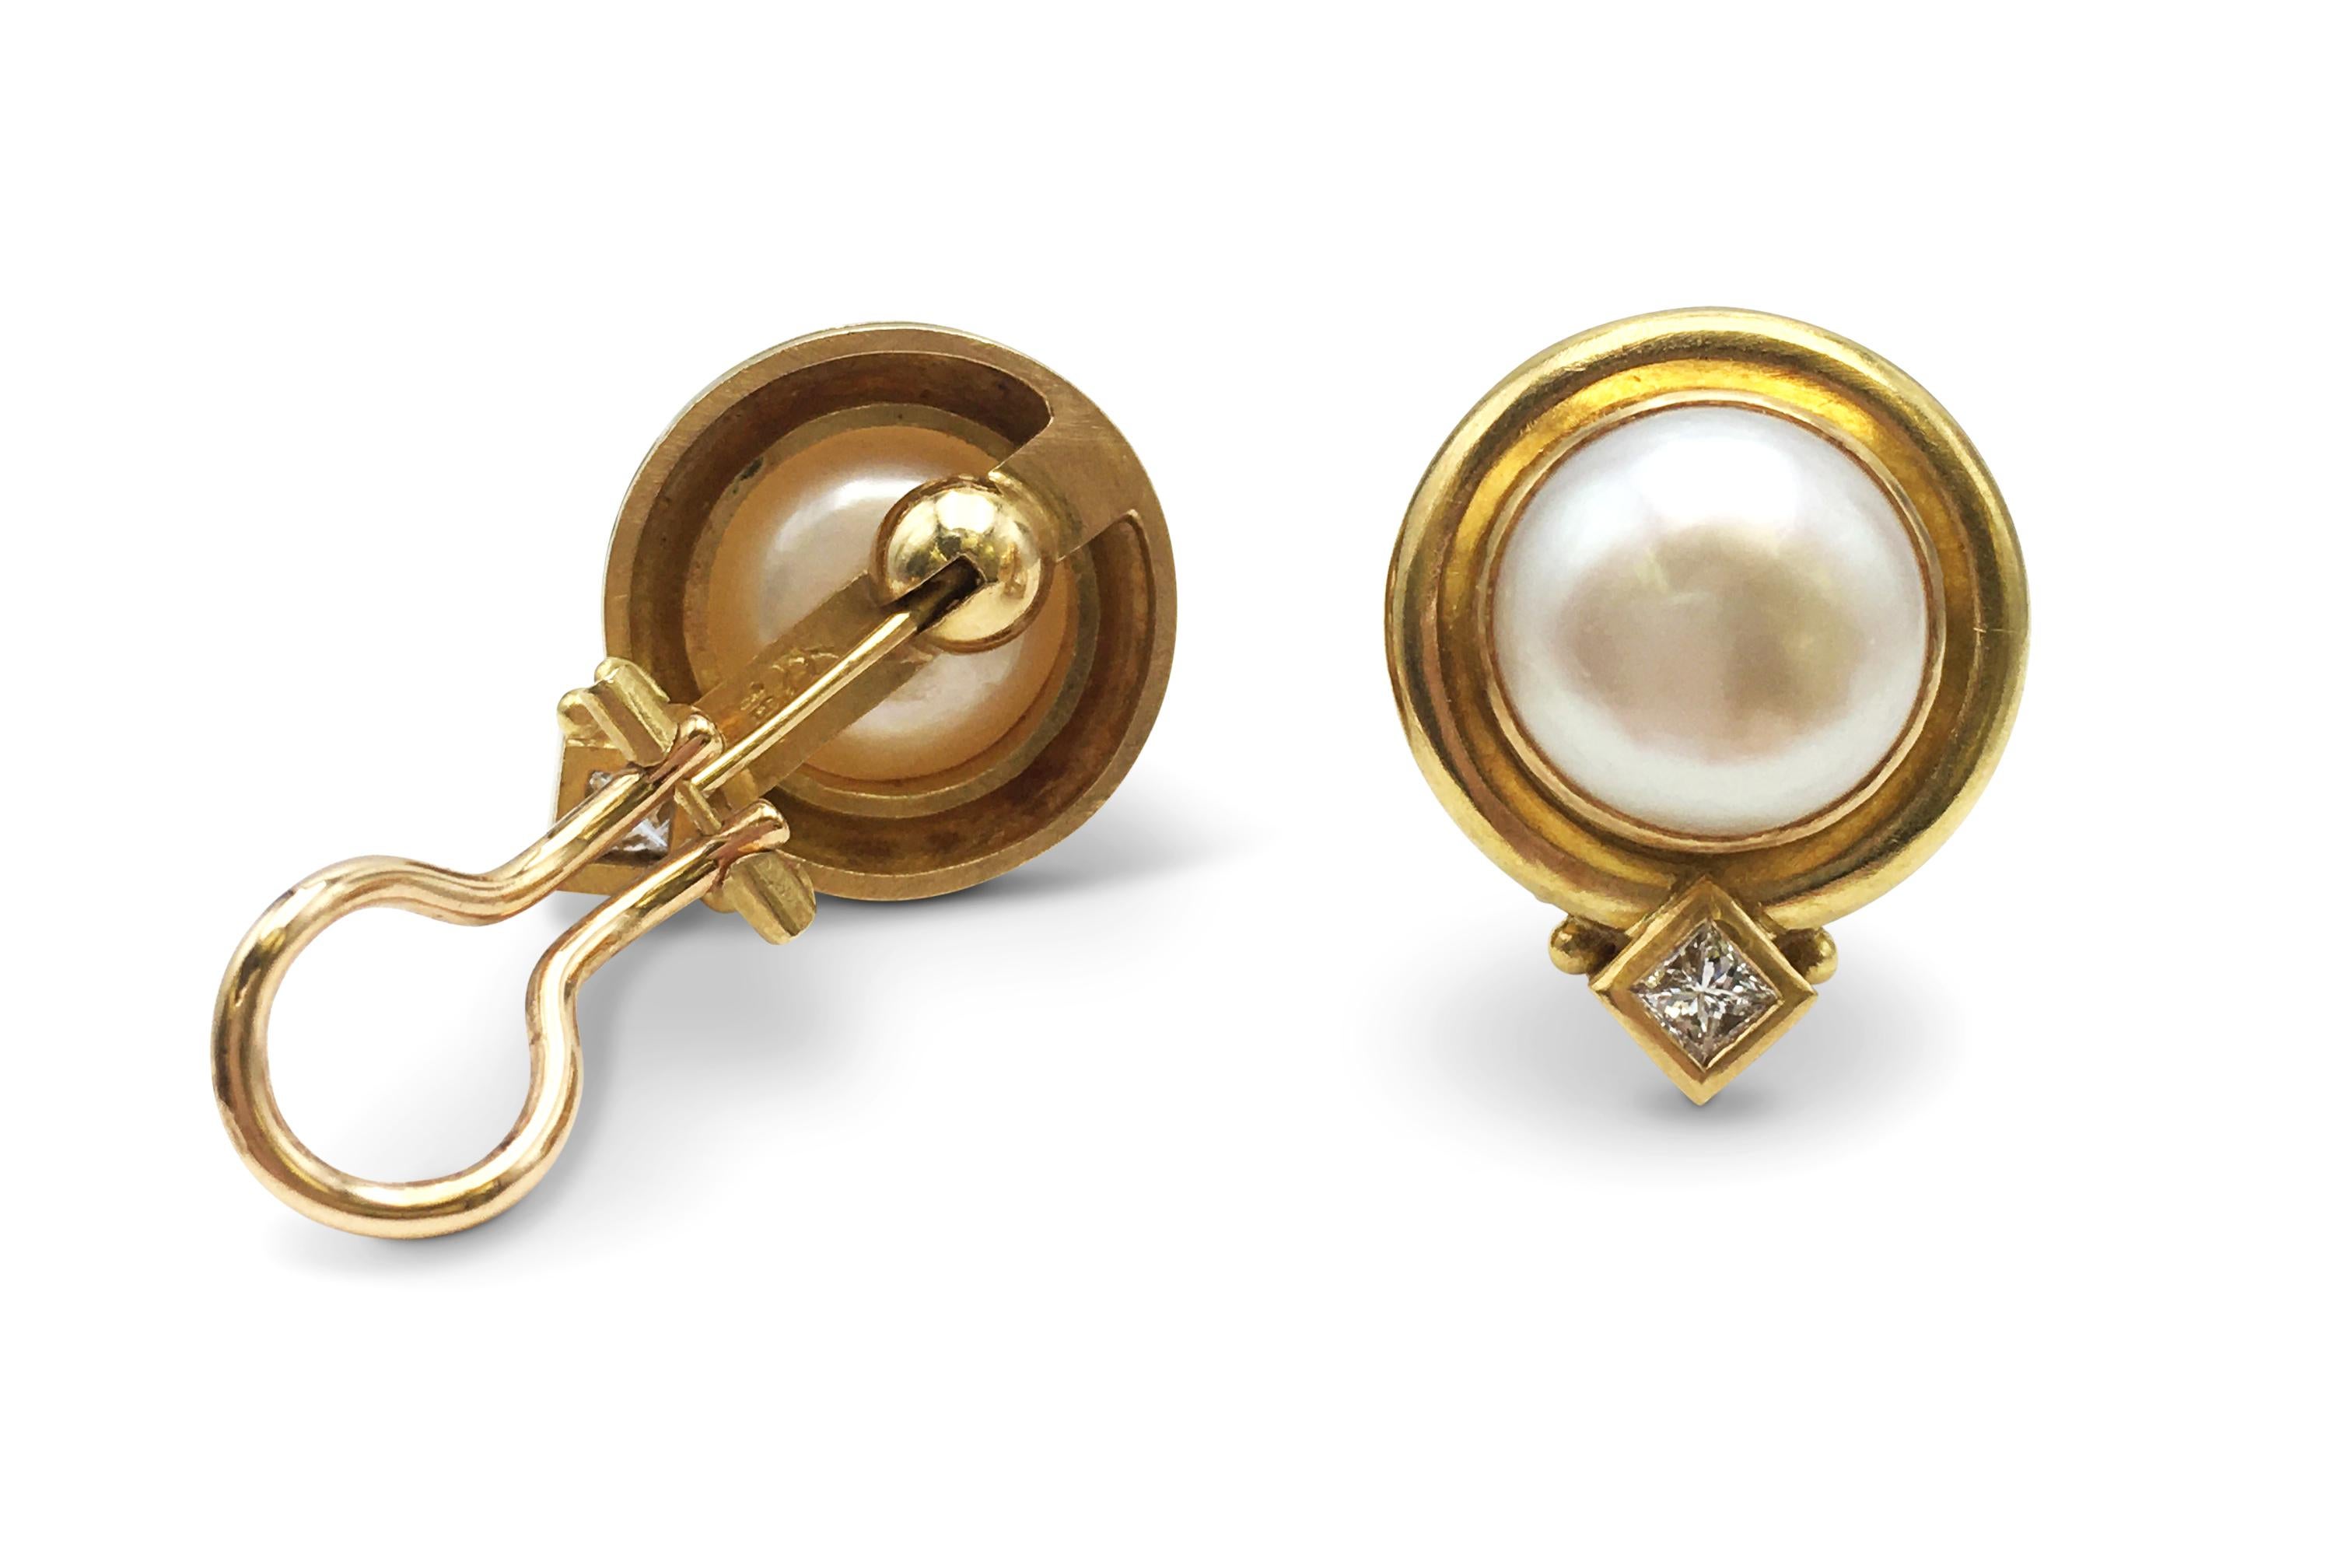 Authentic Elizabeth Locke earrings crafted in 18 karat yellow gold.  Each earring features a beautiful 12mm Mabe pearl and a square-cut diamond weighing approximately .10ct.  The Earrings measure 22mm in length and 17mm at the widest point.  The